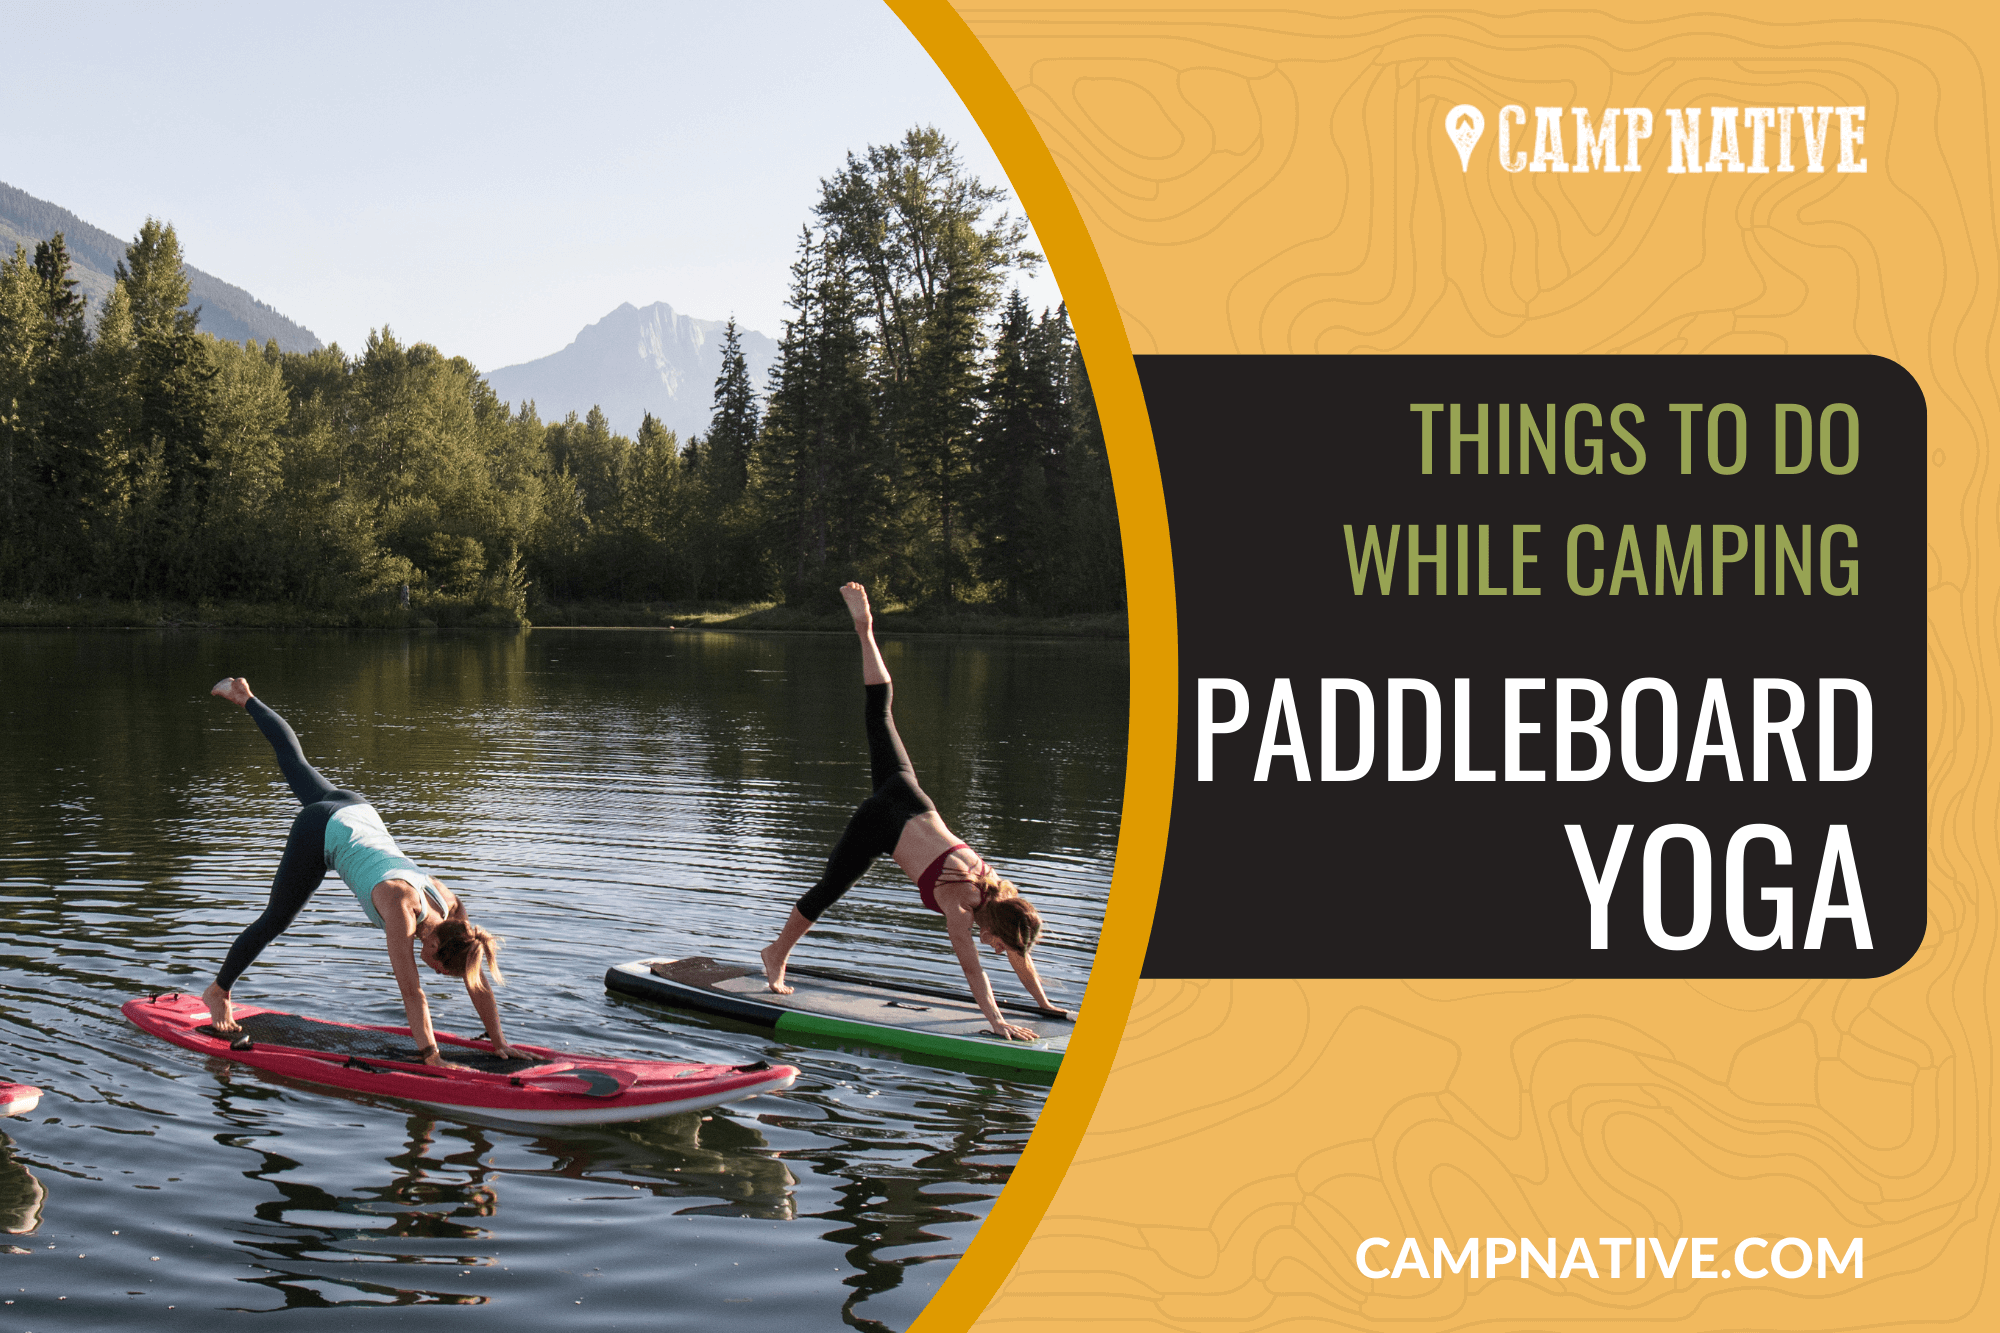 THINGS TO DO WHILE CAMPING PADDLEBOARD YOGA